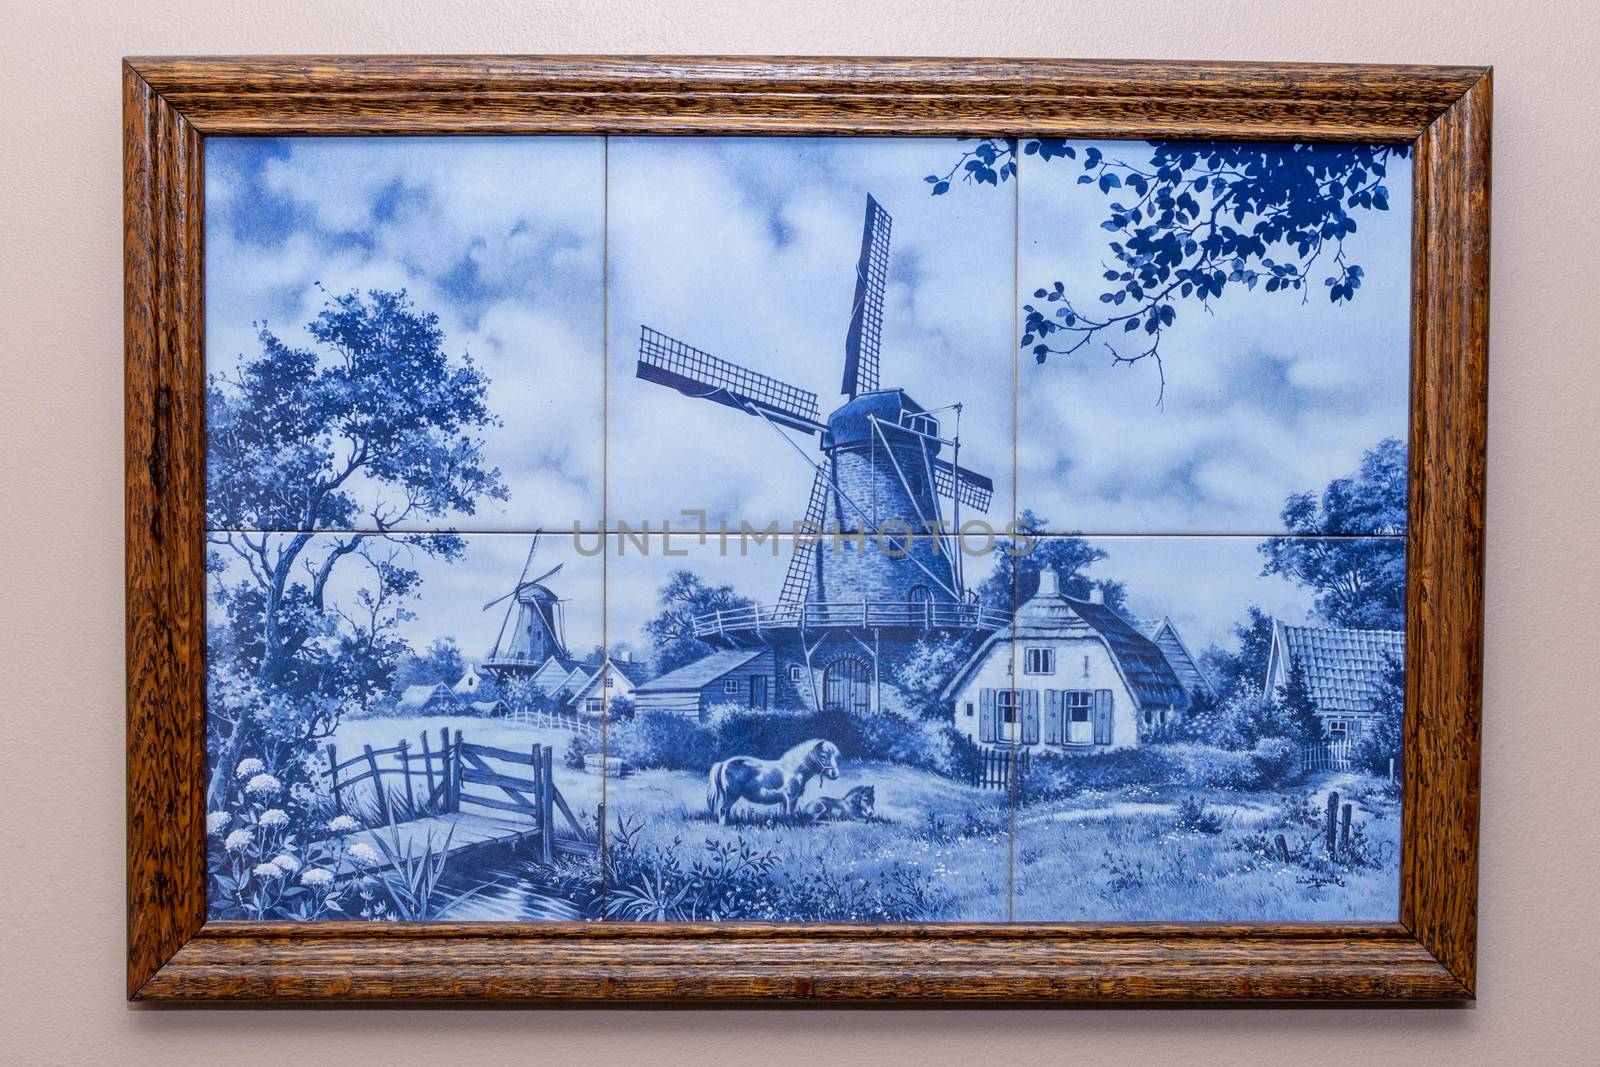 Six Delft Blue tiles in a frame, a souvenir from Holland/Netherl by kingmaphotos